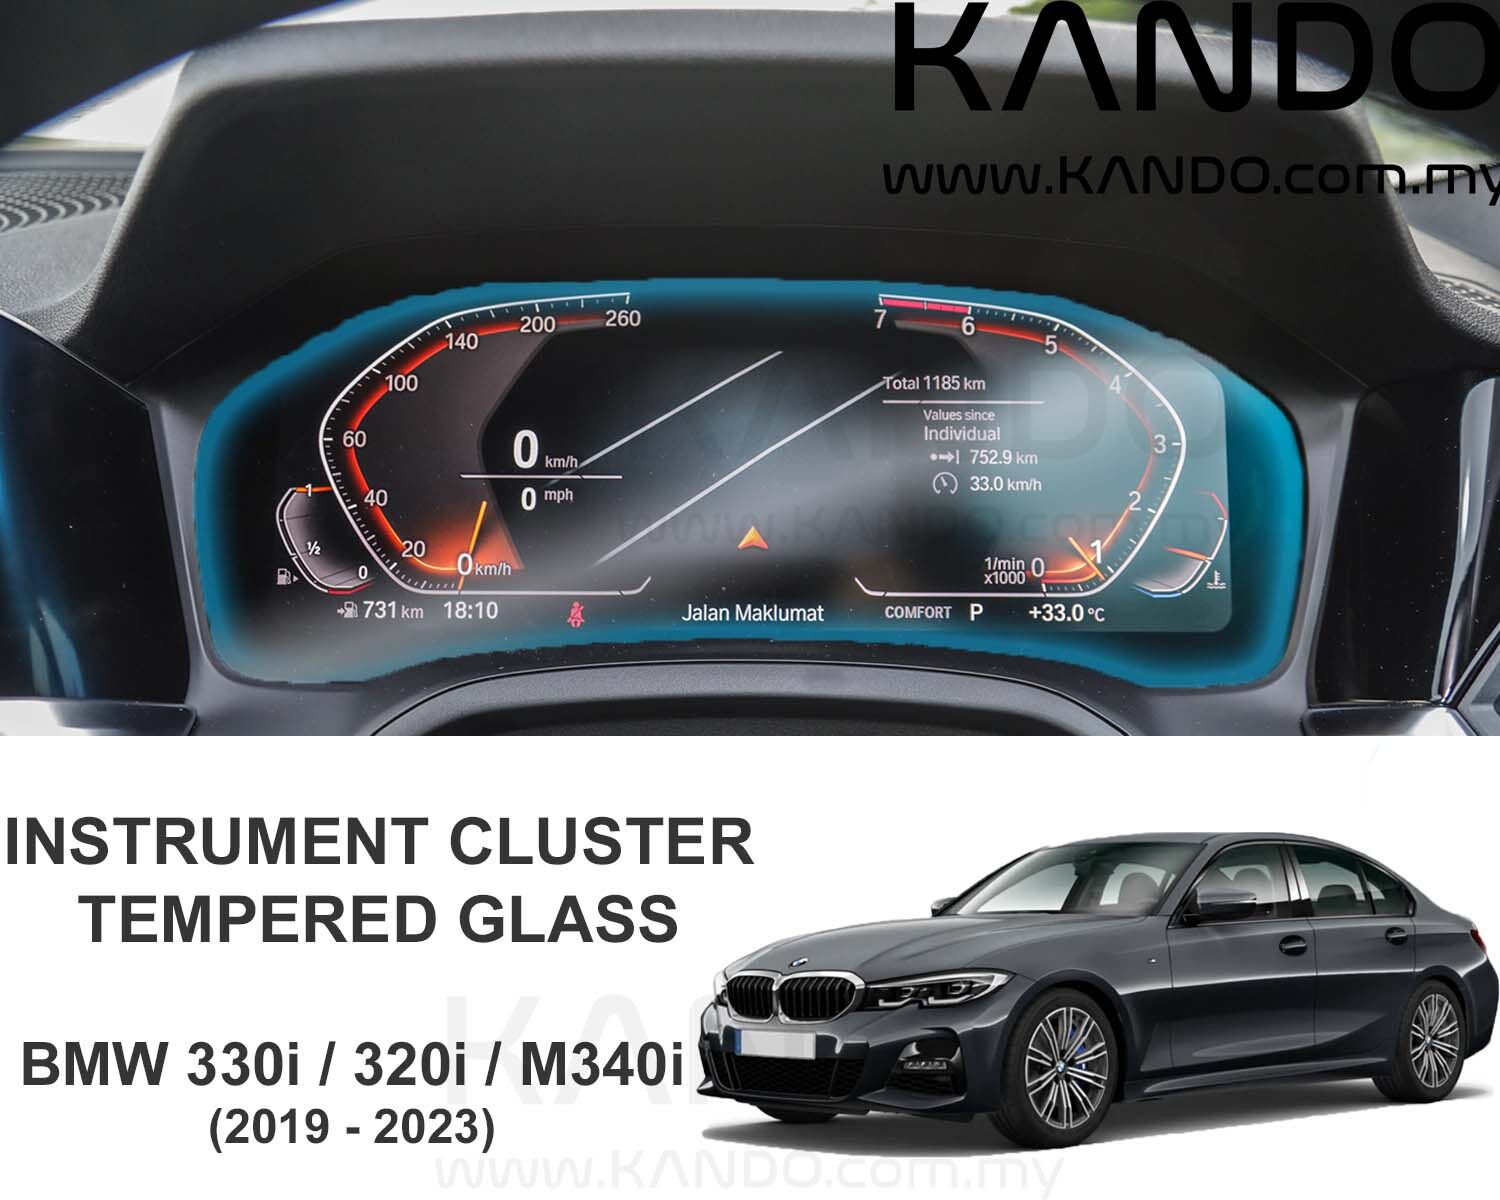 BMW 3 Series Instrument Cluster Tempered Glass Protector BMW 330i Instrument Cluster Tempered Glass Protector BMW 330e Tempered Glass Protector BMW M340 Tempered Glass Protector BMW G20 Meter Glass BMW 320i Glass Protector BMW G20 3 Series Glass Protector